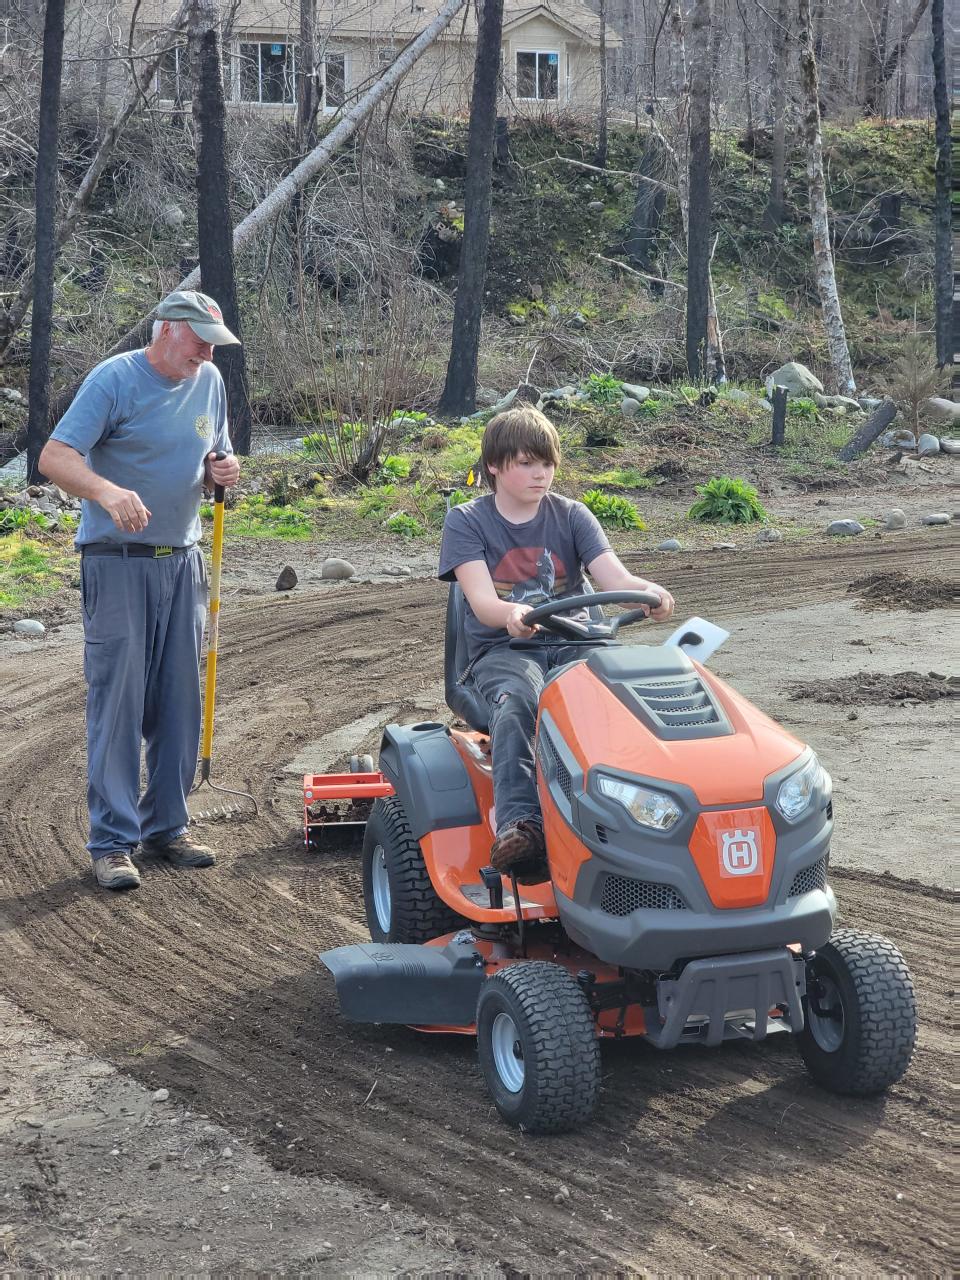 Elliott Baker, 13, drives a riding lawn mower on property of his family's cabin in Little North Santiam. The original cabin was burned during the Beachie Creek Fire in 2020. A large part of the rebuilding process has been planting and landscaping.